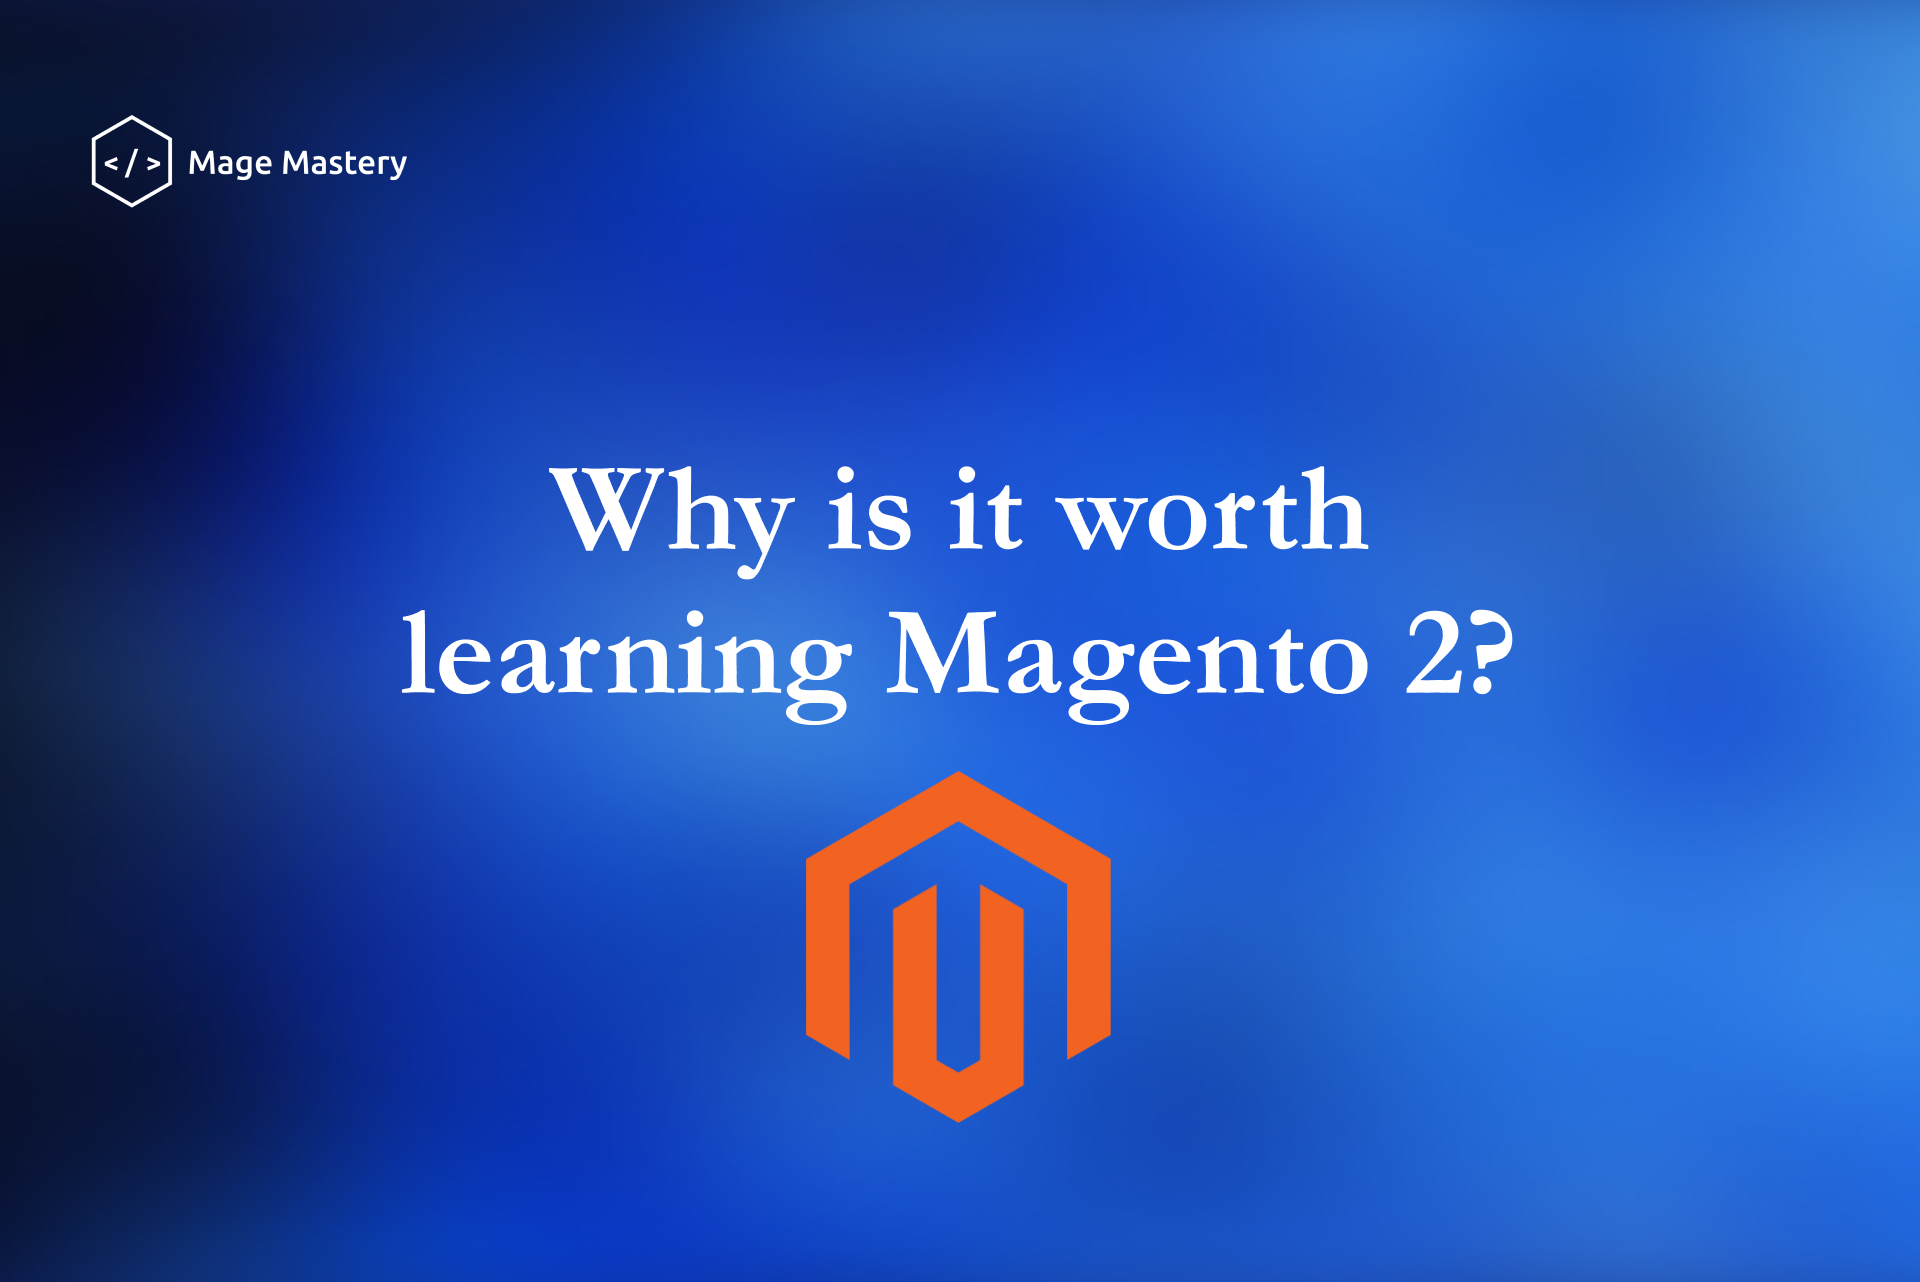 Reasons to learn Magento 2